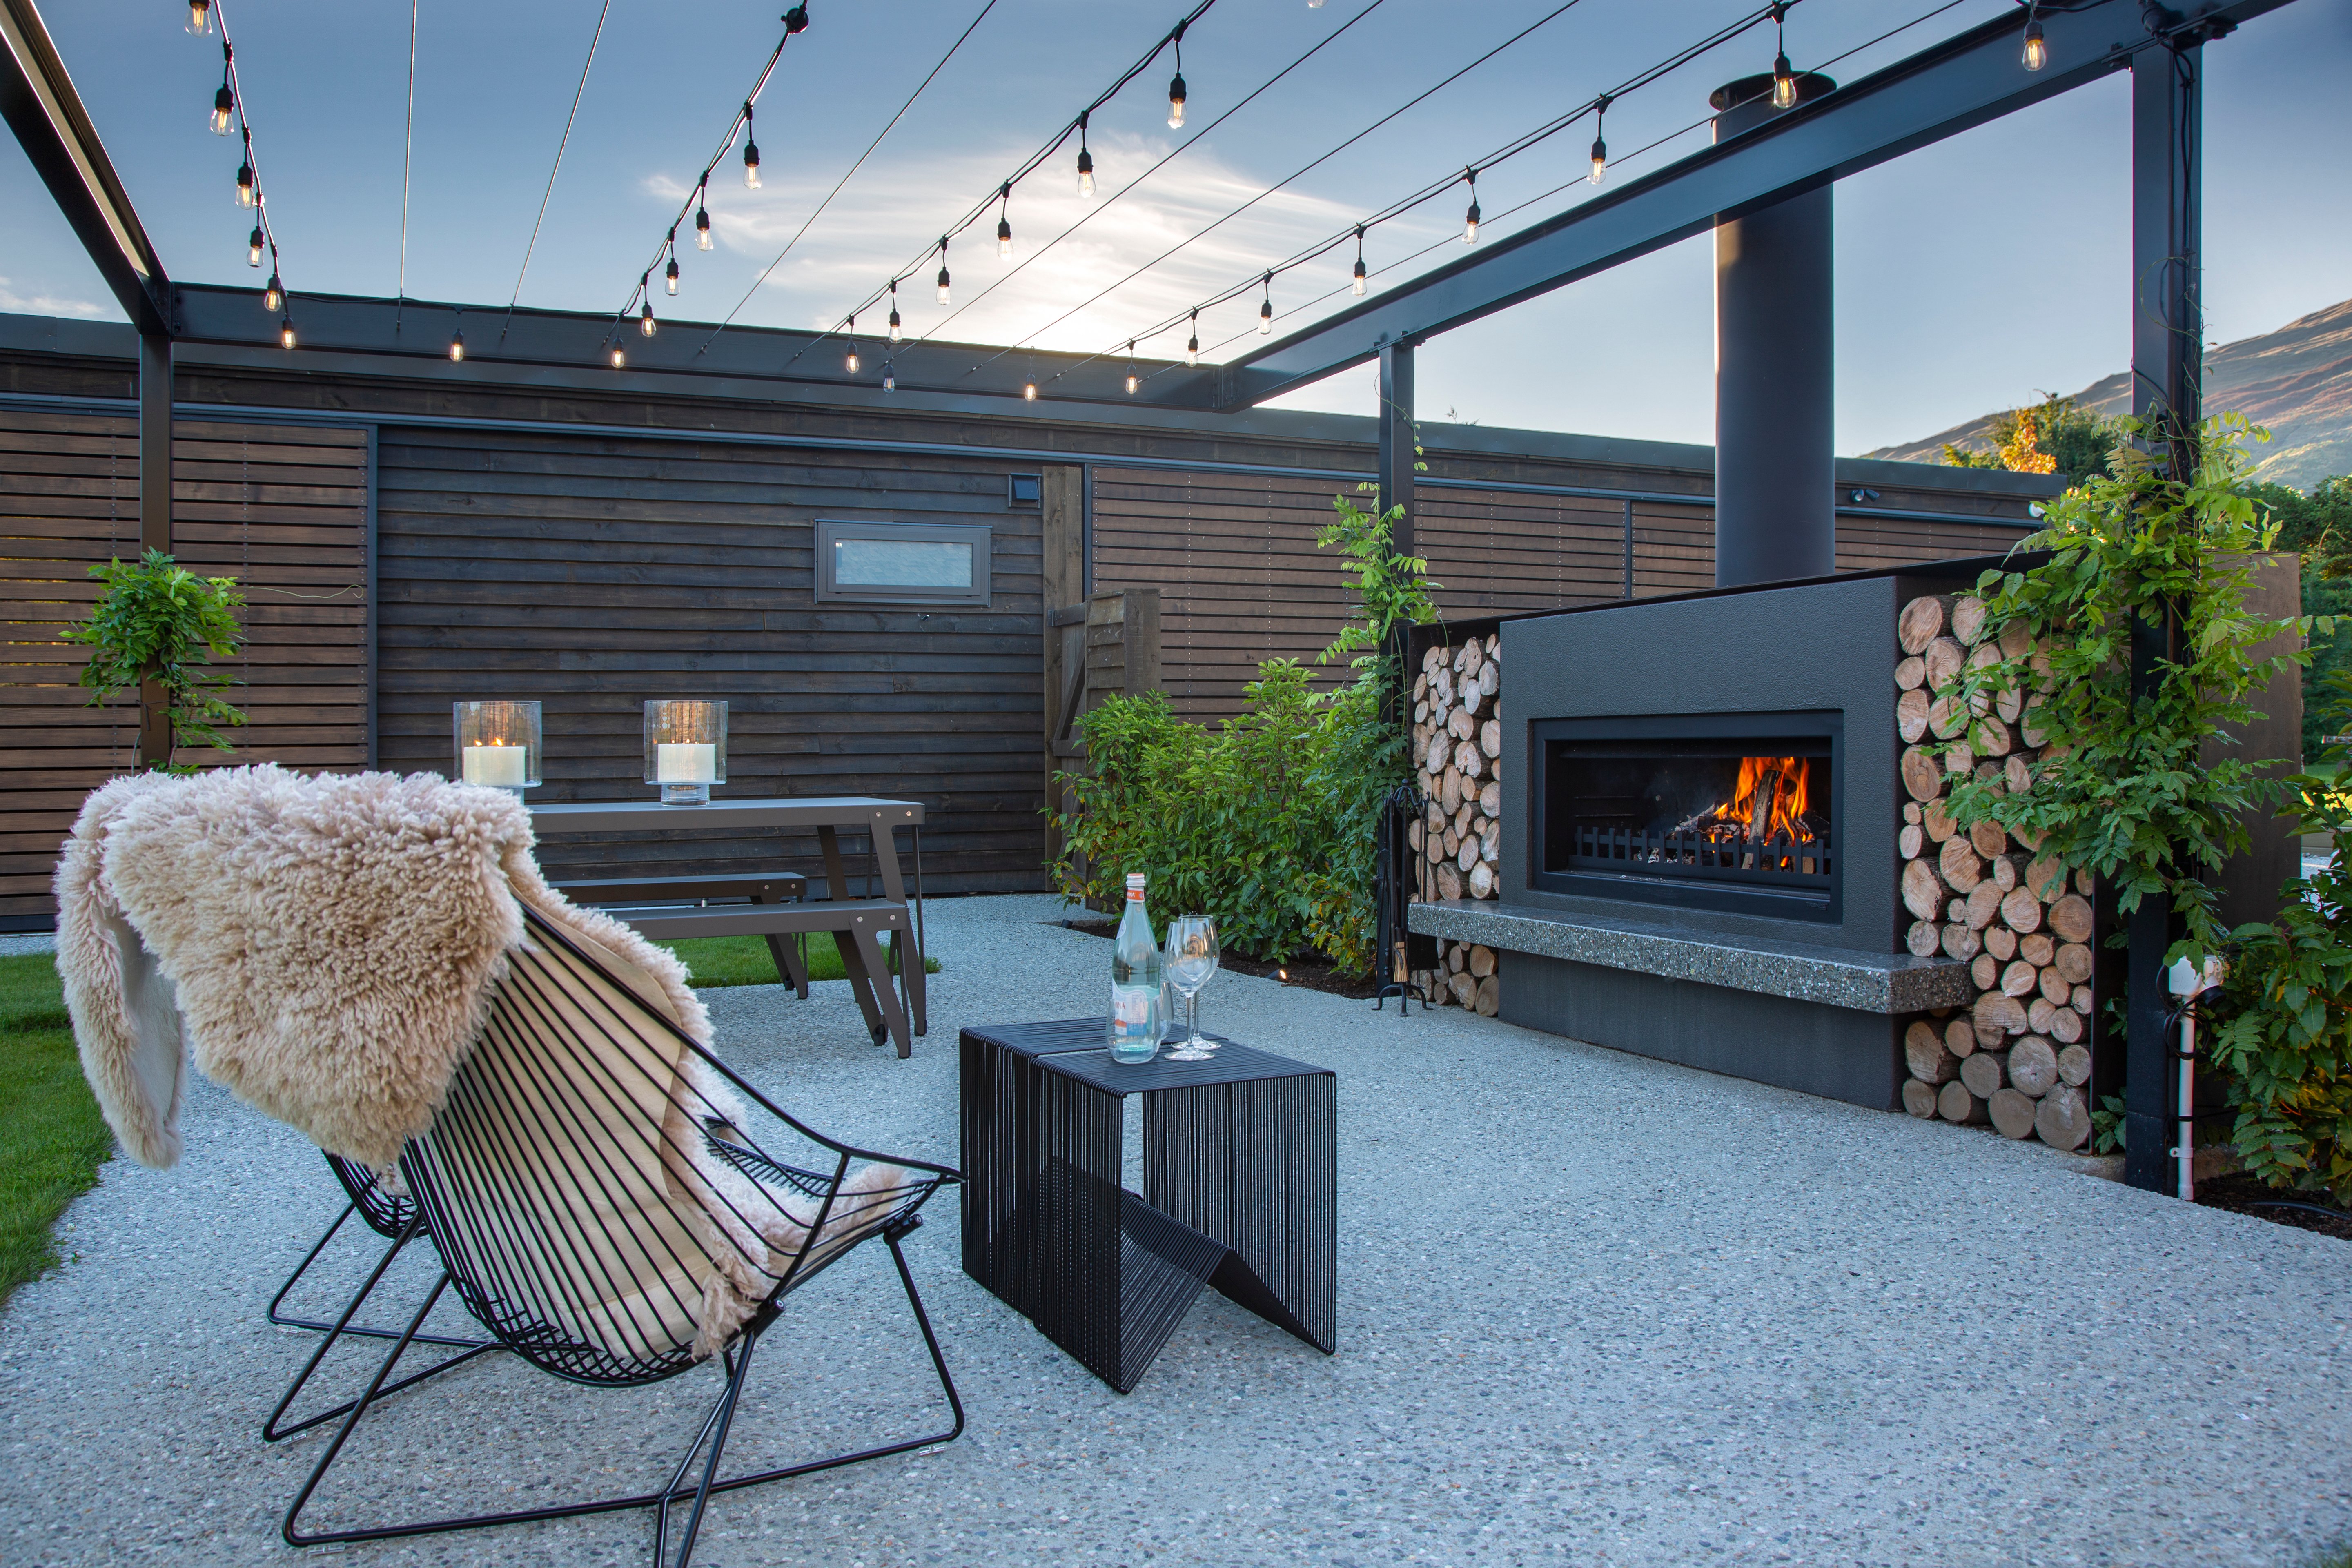 How to improve your existing outdoor area